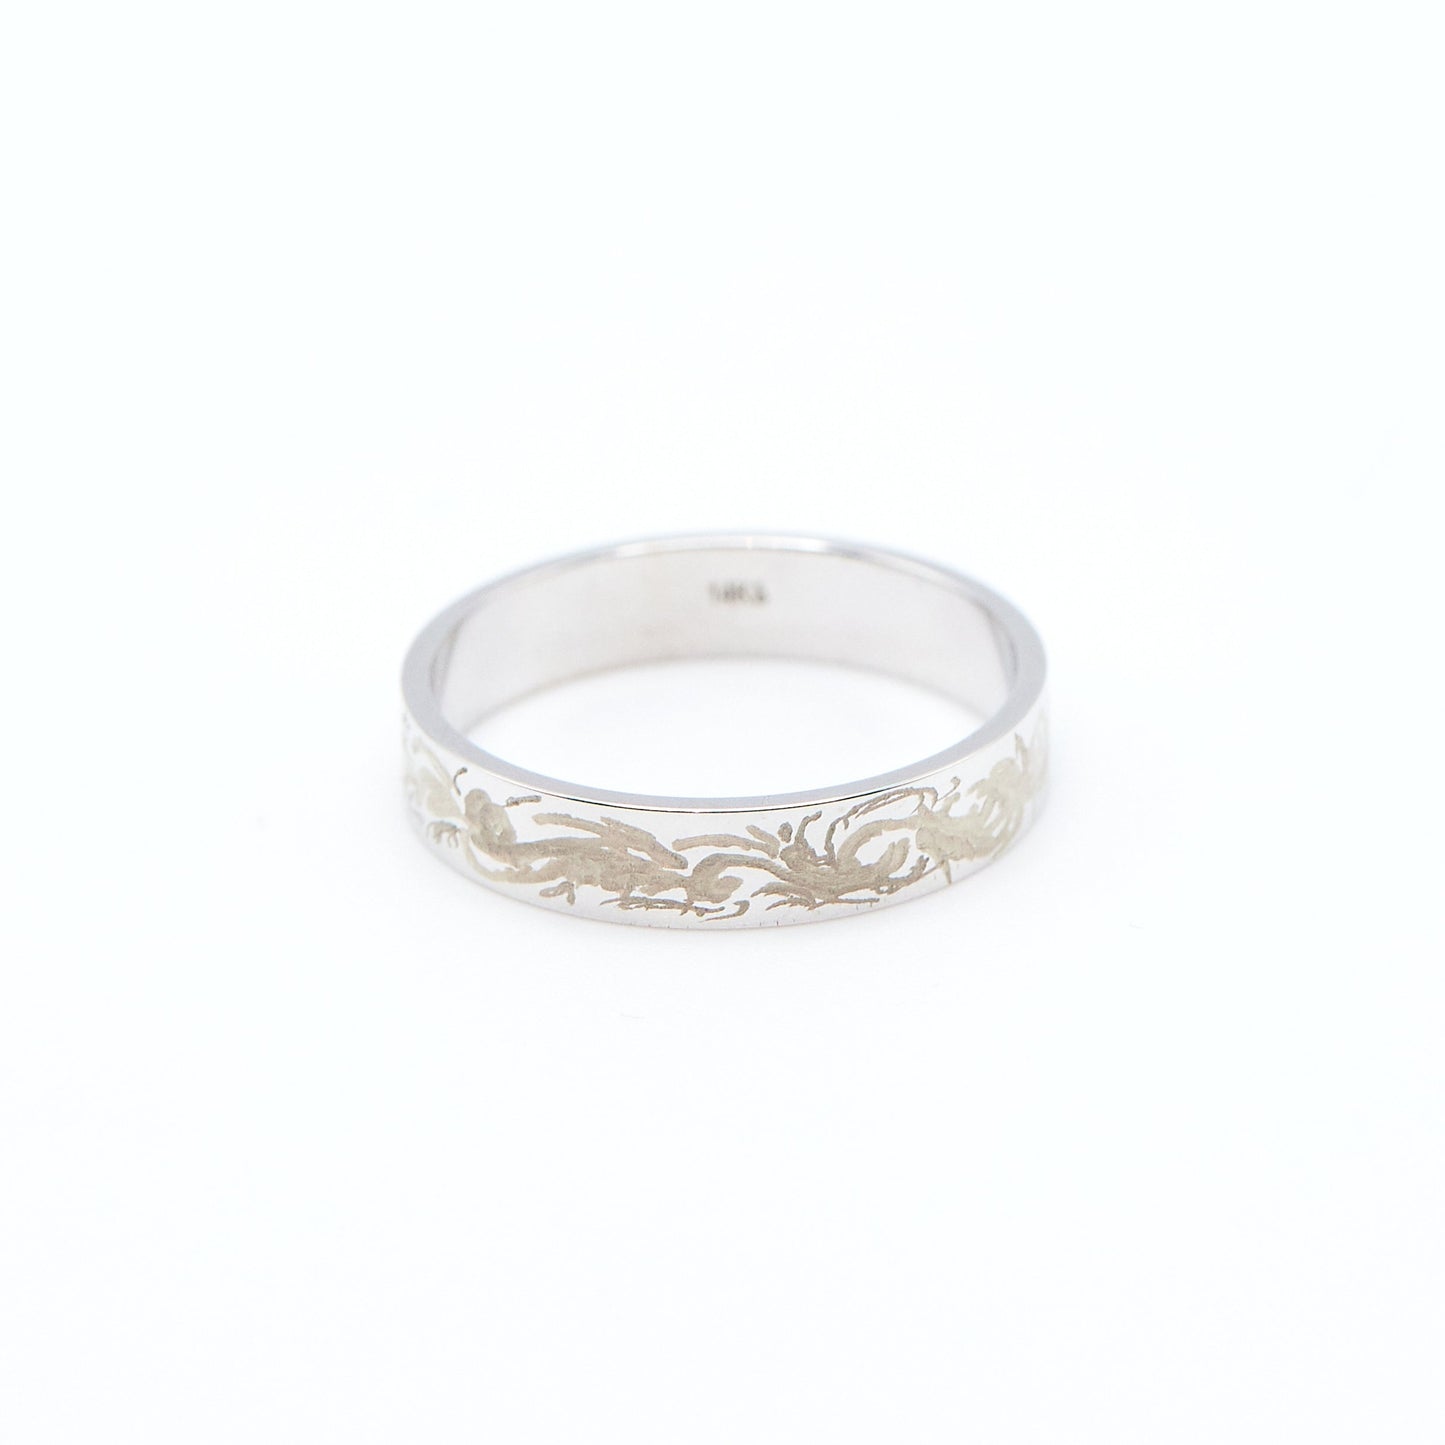 Load image into Gallery viewer, white gold 4mm wide flat band with hand engraving design on white background
